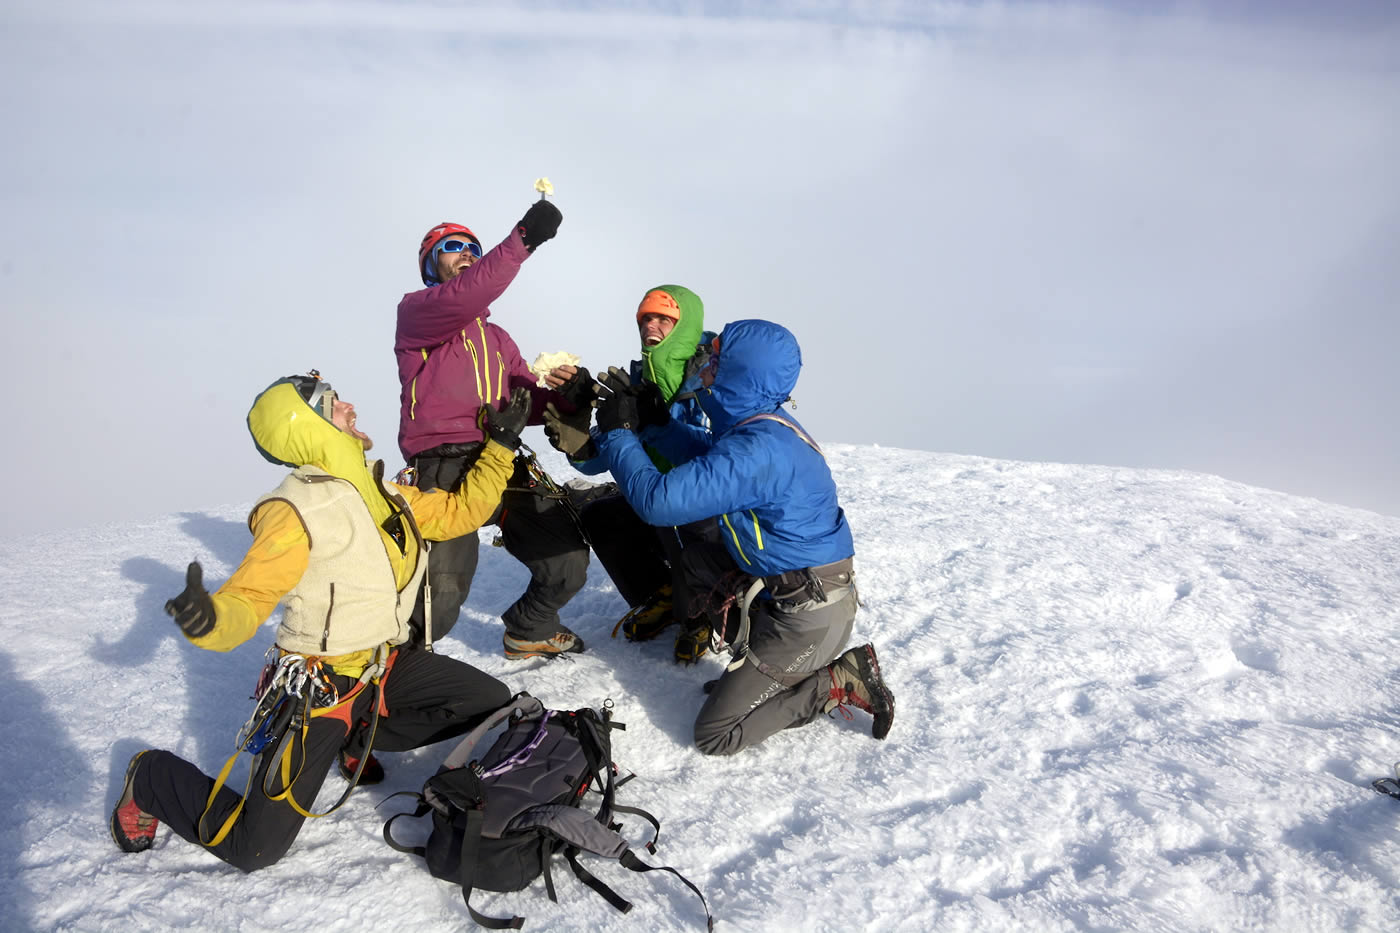 The team kneels on the summit in awe before a piece of Swiss cheese. One of the expedition's sponsors was a Swiss cheese company that provided 25 kilograms of its finest product. Left to right are Antoine Moineville, Fabio Lupo, Christian Ledergerber and Jerome Sullivan. [Photo] Silvan Schuepbach